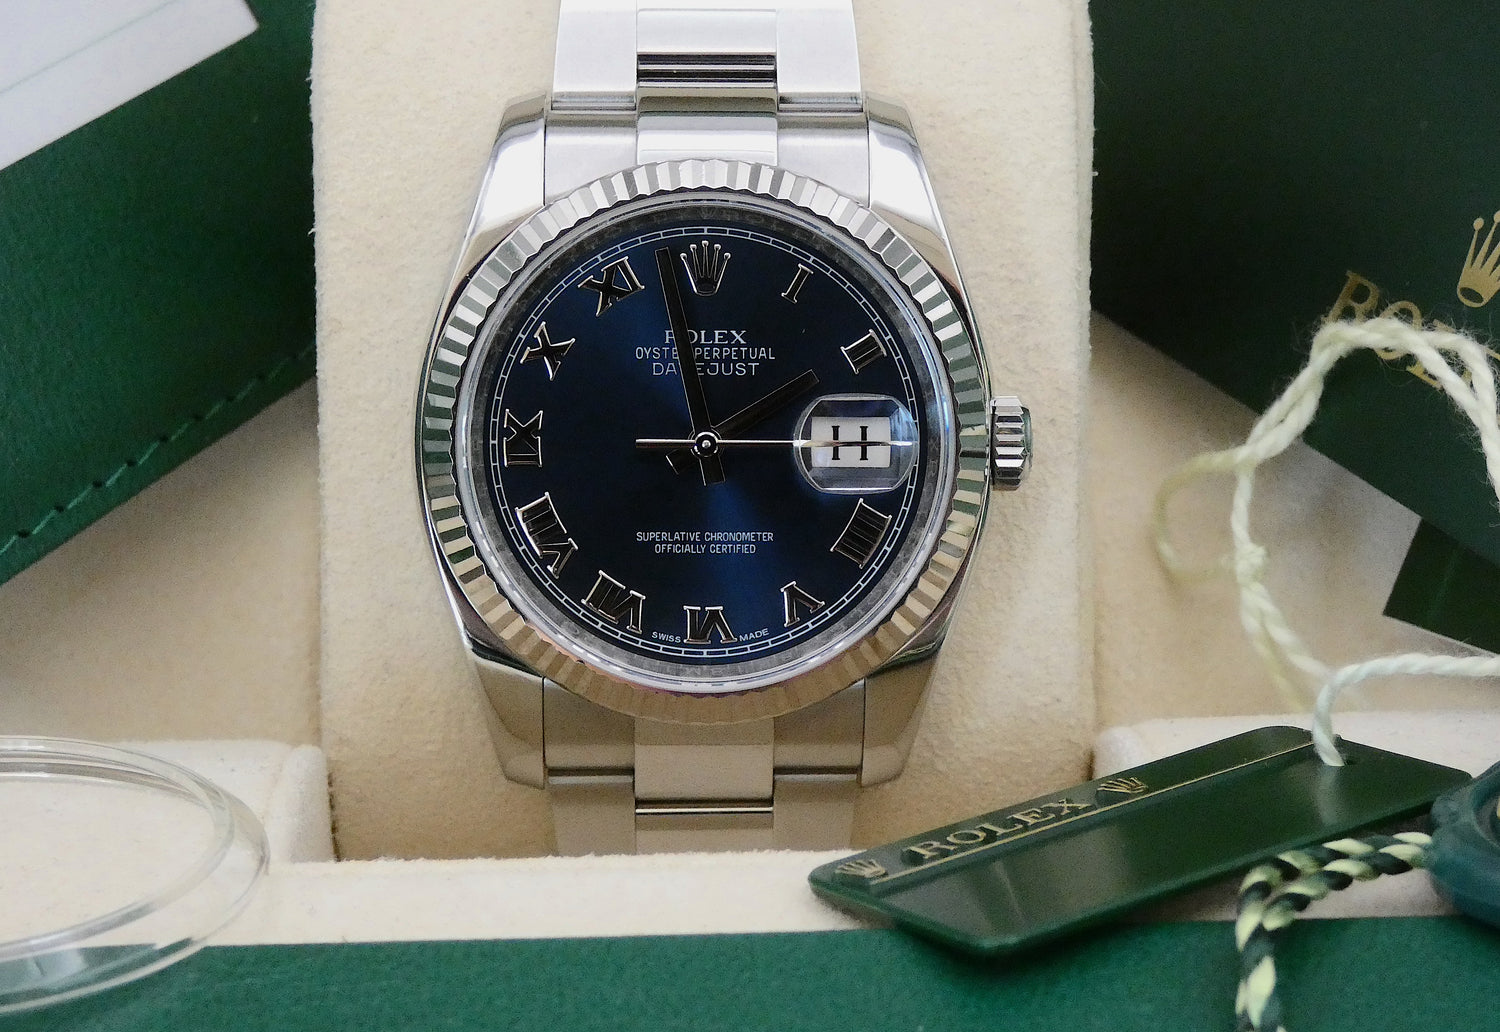 SOLD 116234 Datejust 36 / Blue dial / Full Set 2016